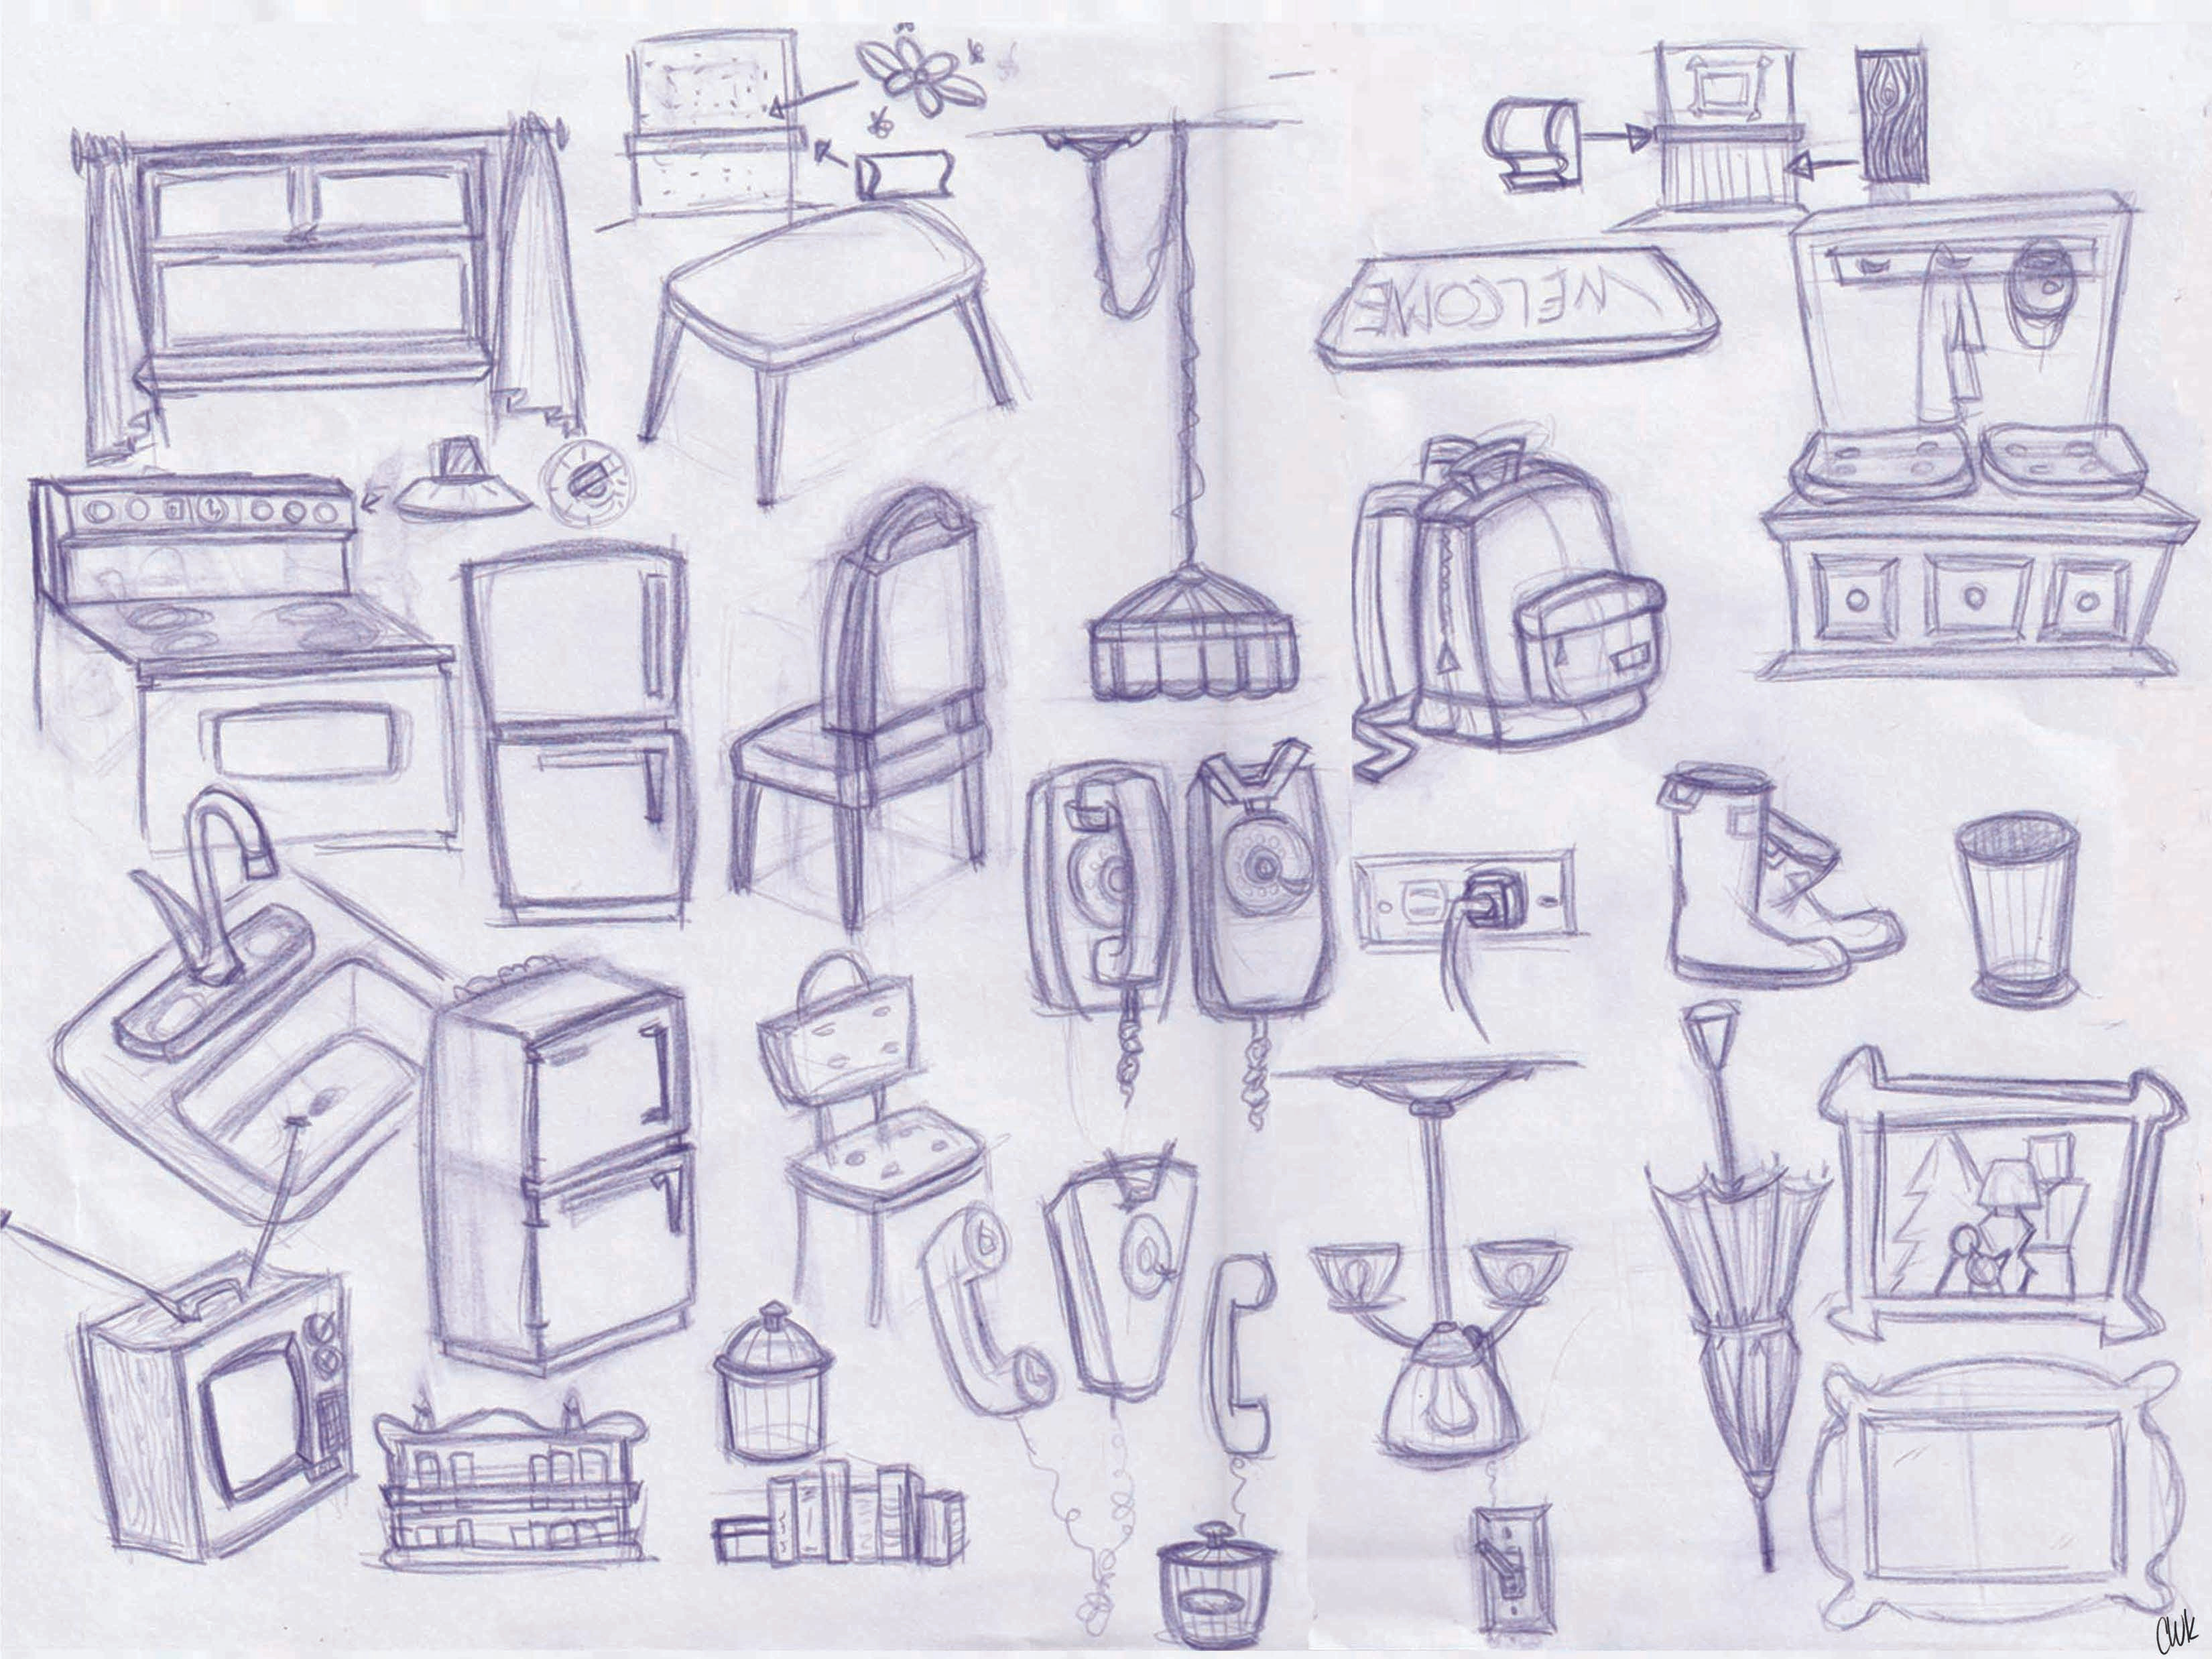 Early concept sketches for props in the kitchen, living room, and entry way of Thea's house.